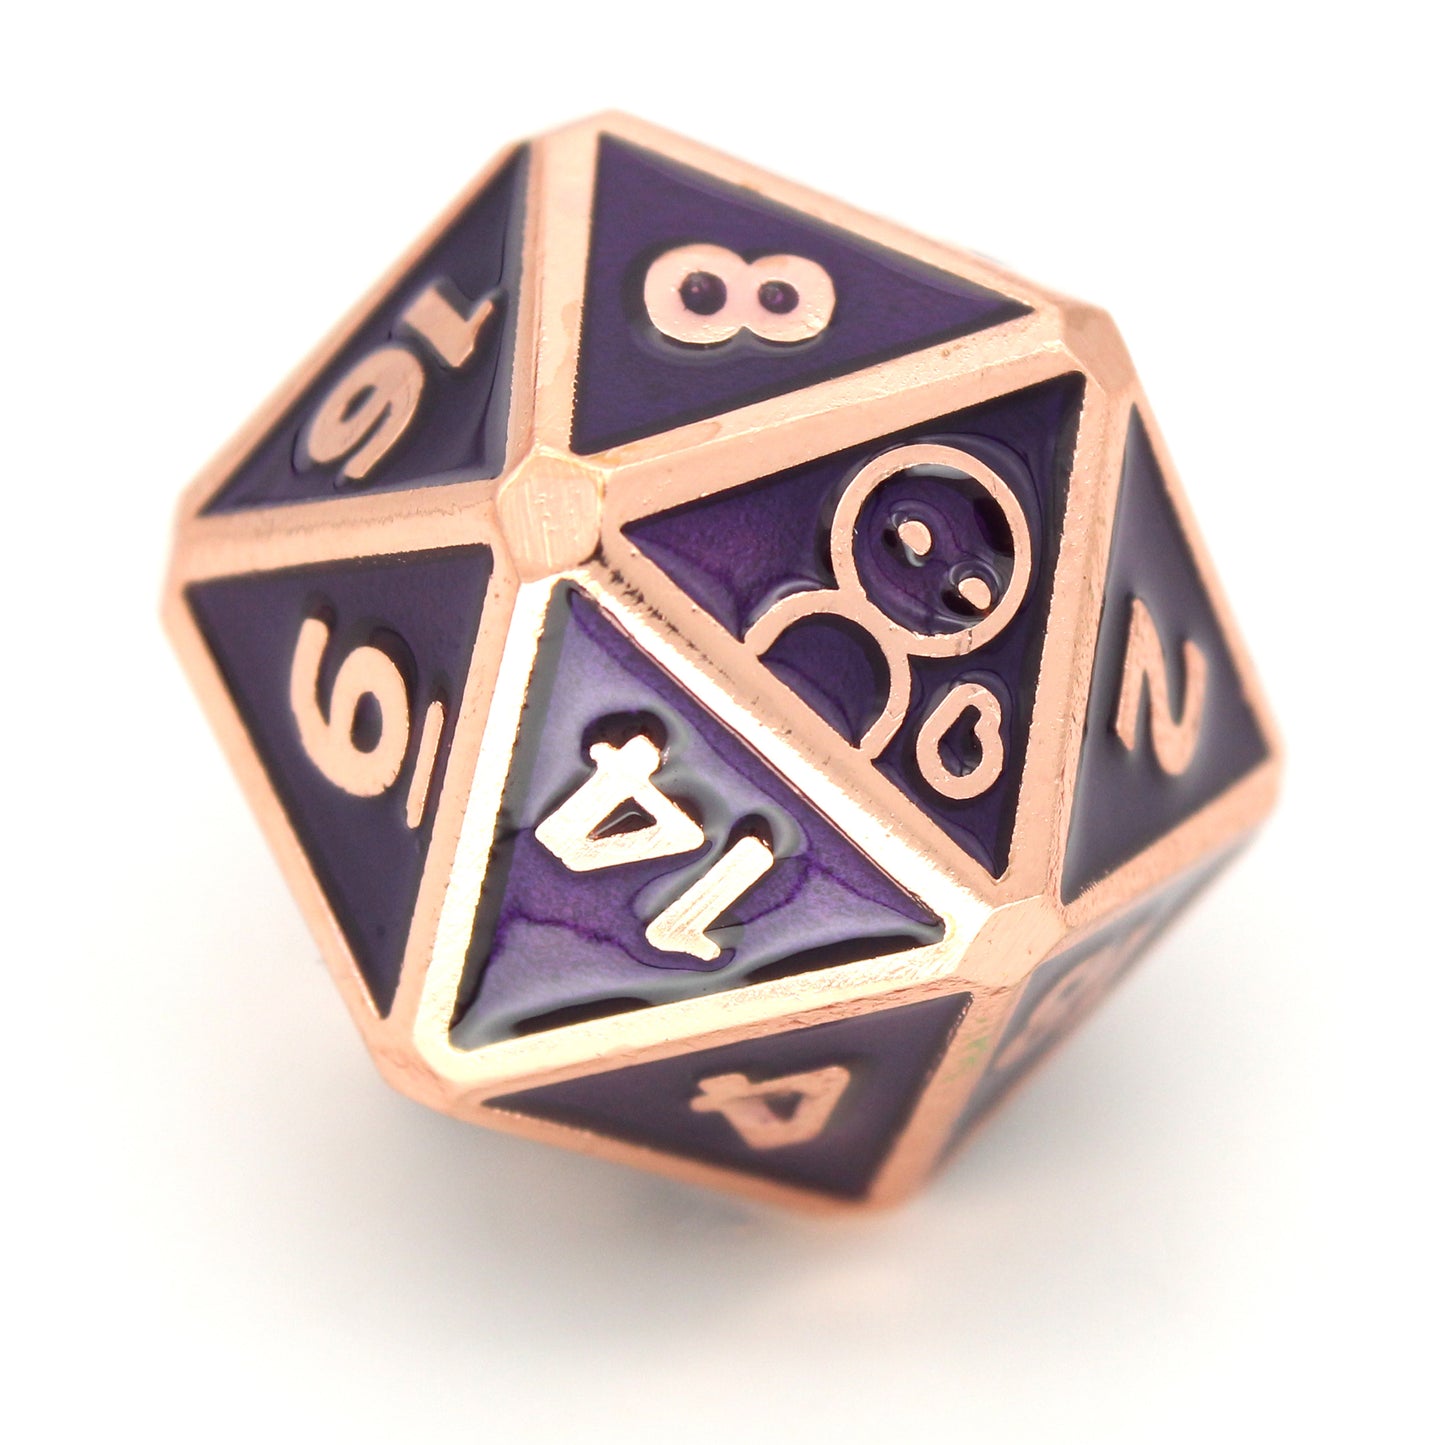 Sigmar is a 7-piece rose gold, framed metal set filled with an intense, purple enamel. It is part of the Adventure Is Nigh collection.